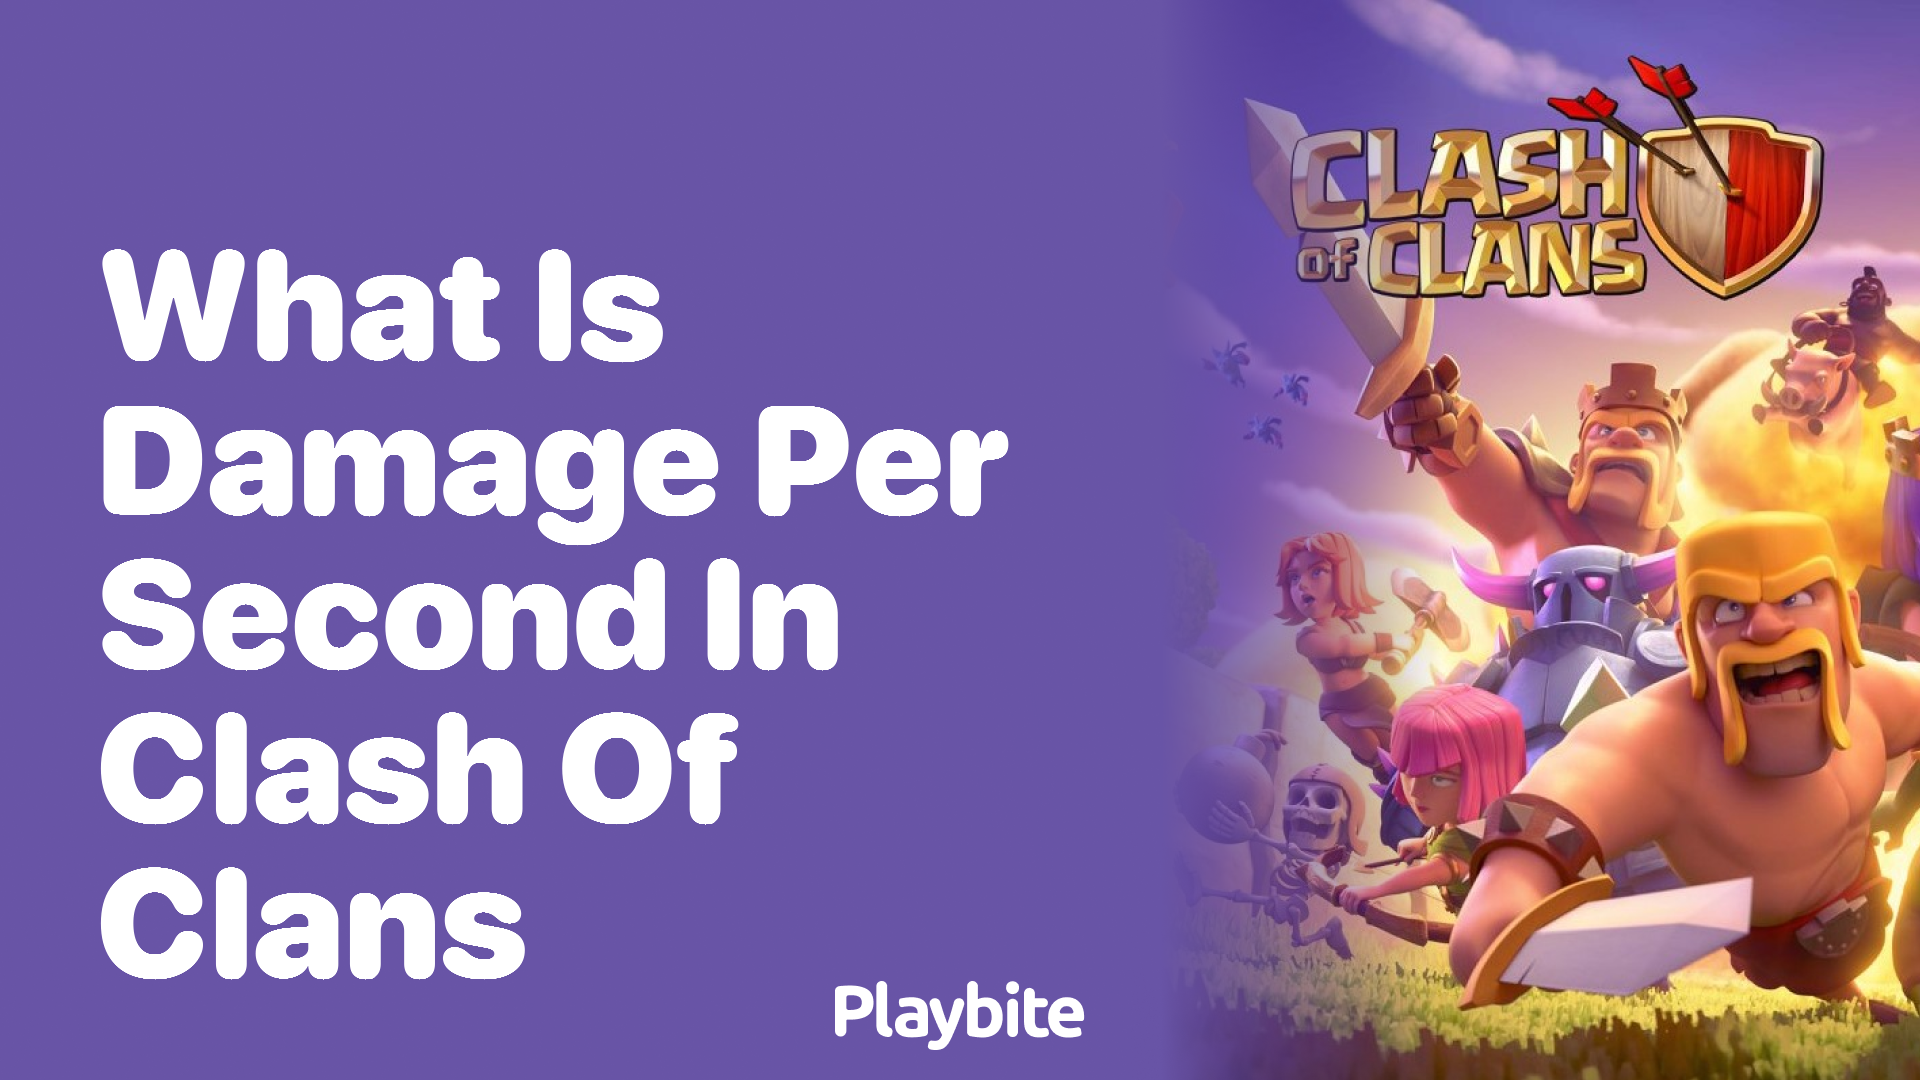 What Is Damage Per Second in Clash of Clans?